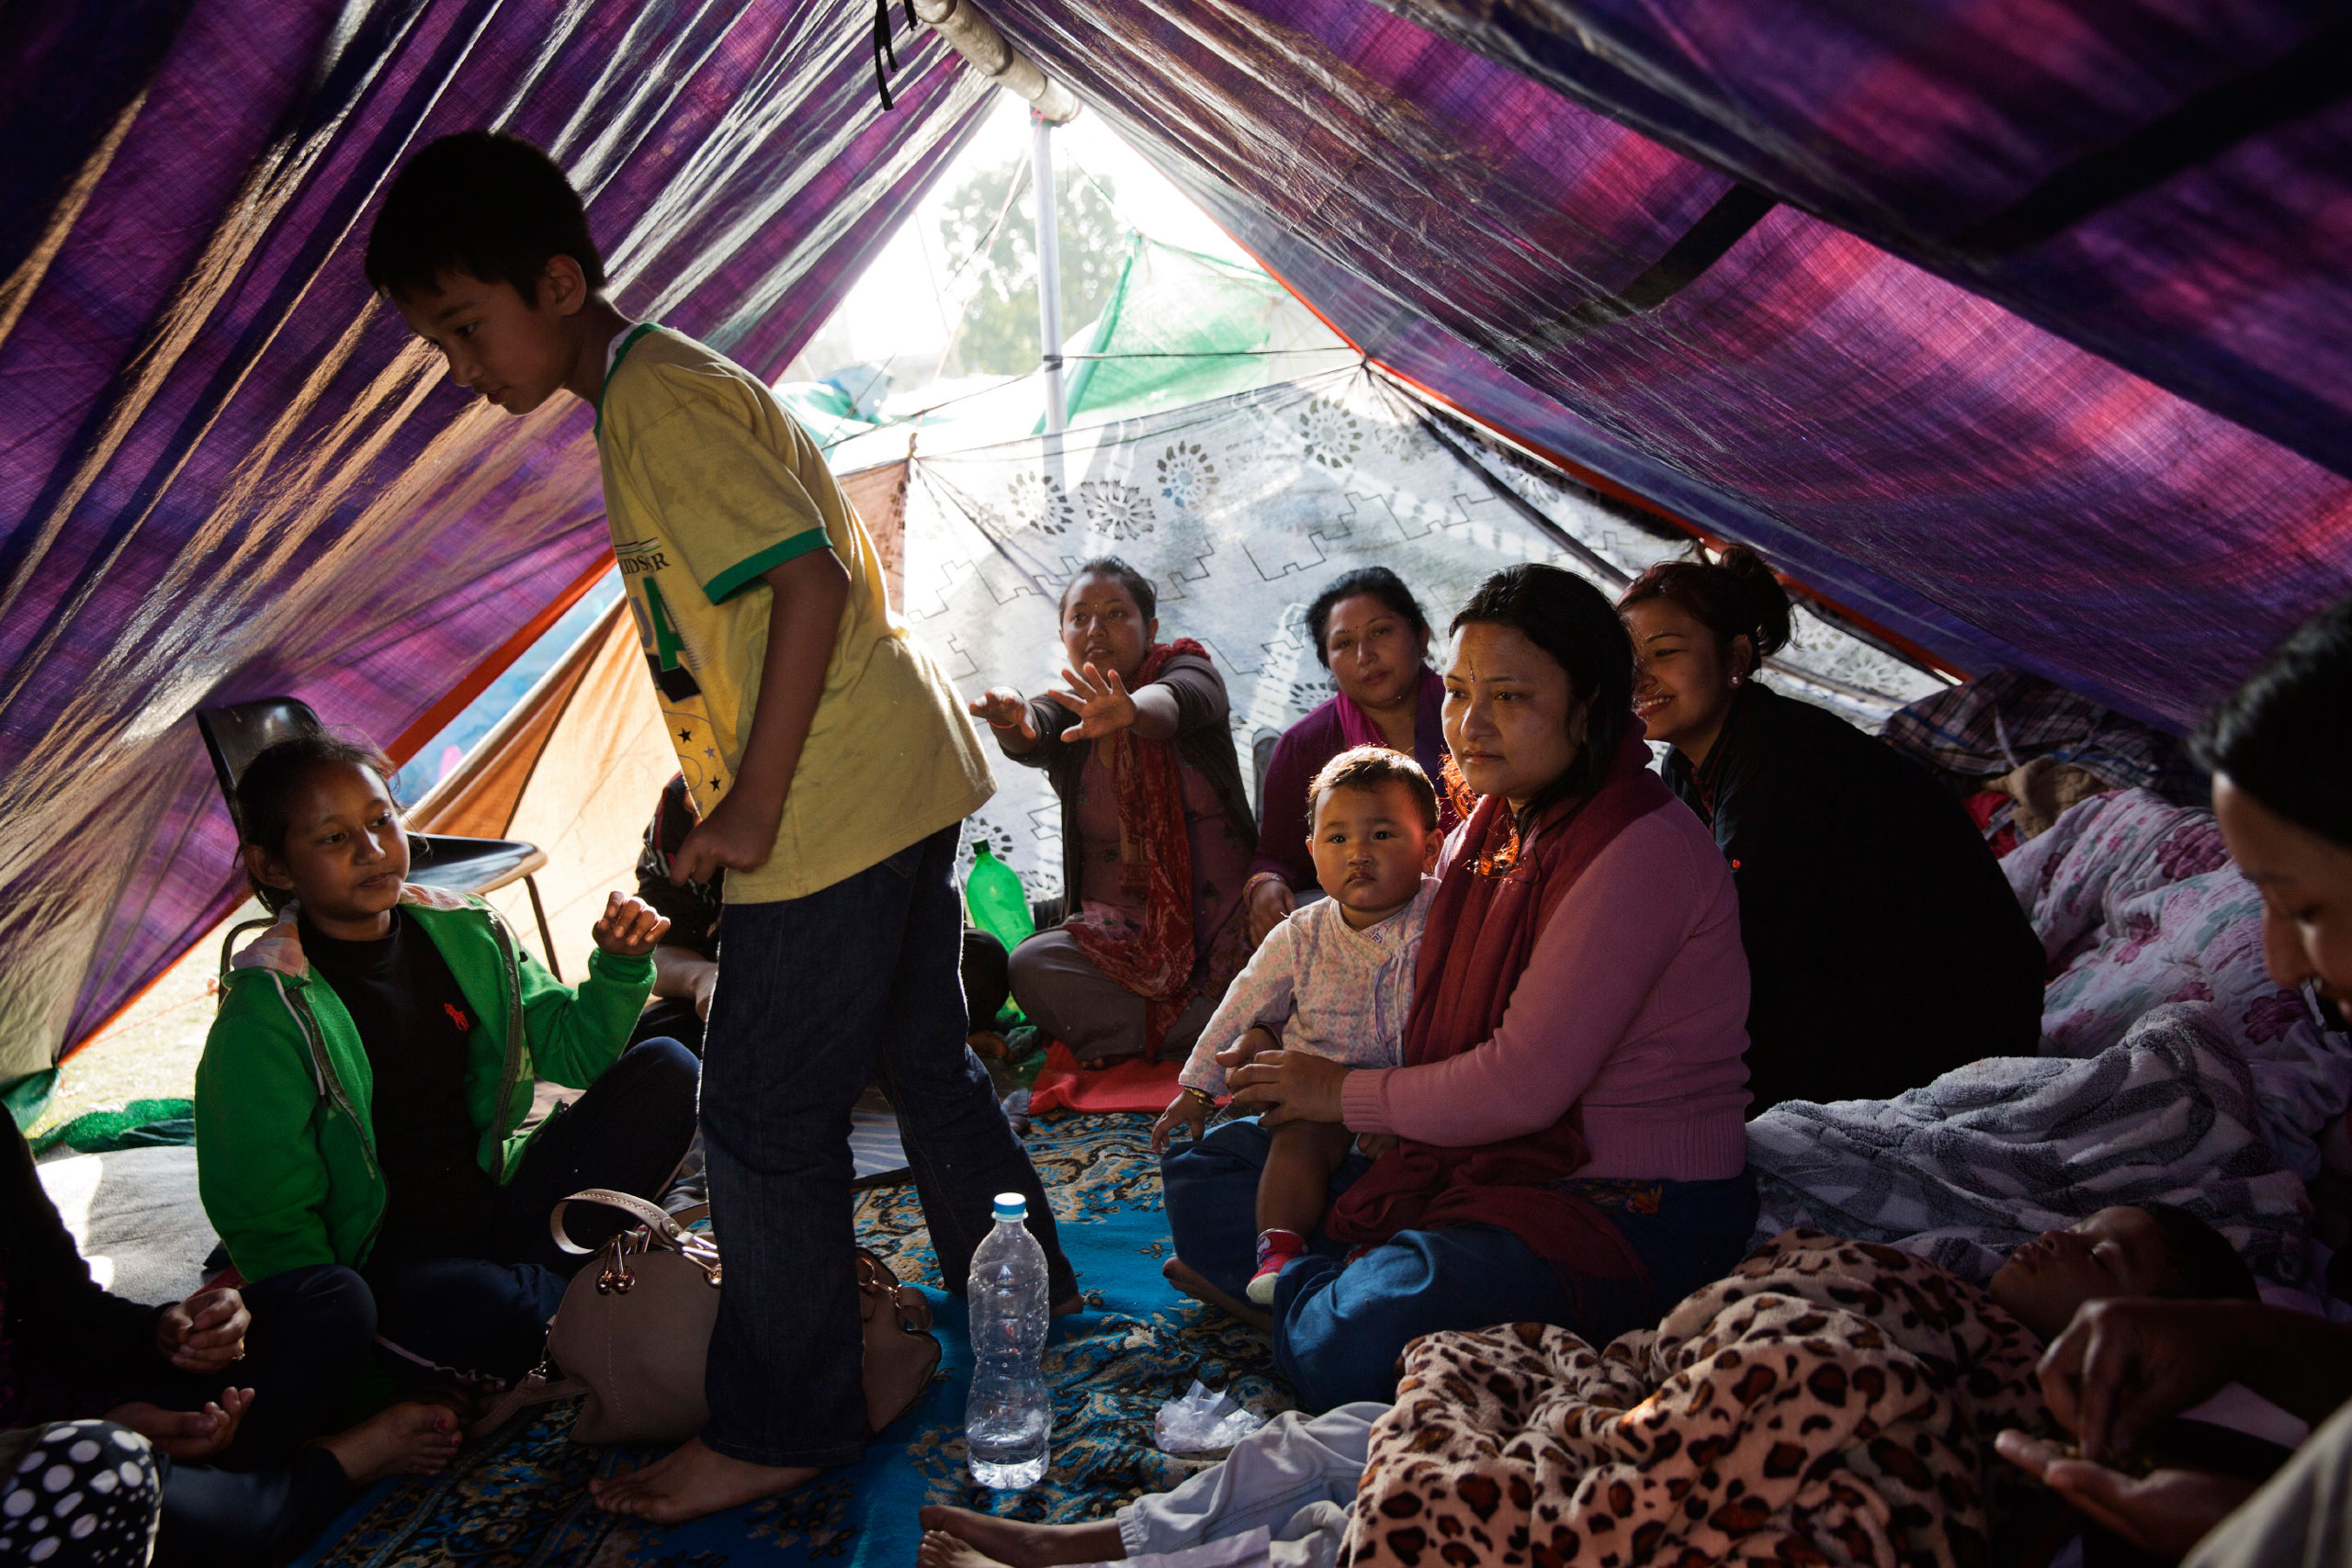 A displaced Nepalese family takes shelter in a tent in a Kathmandu park, April 27, 2015.